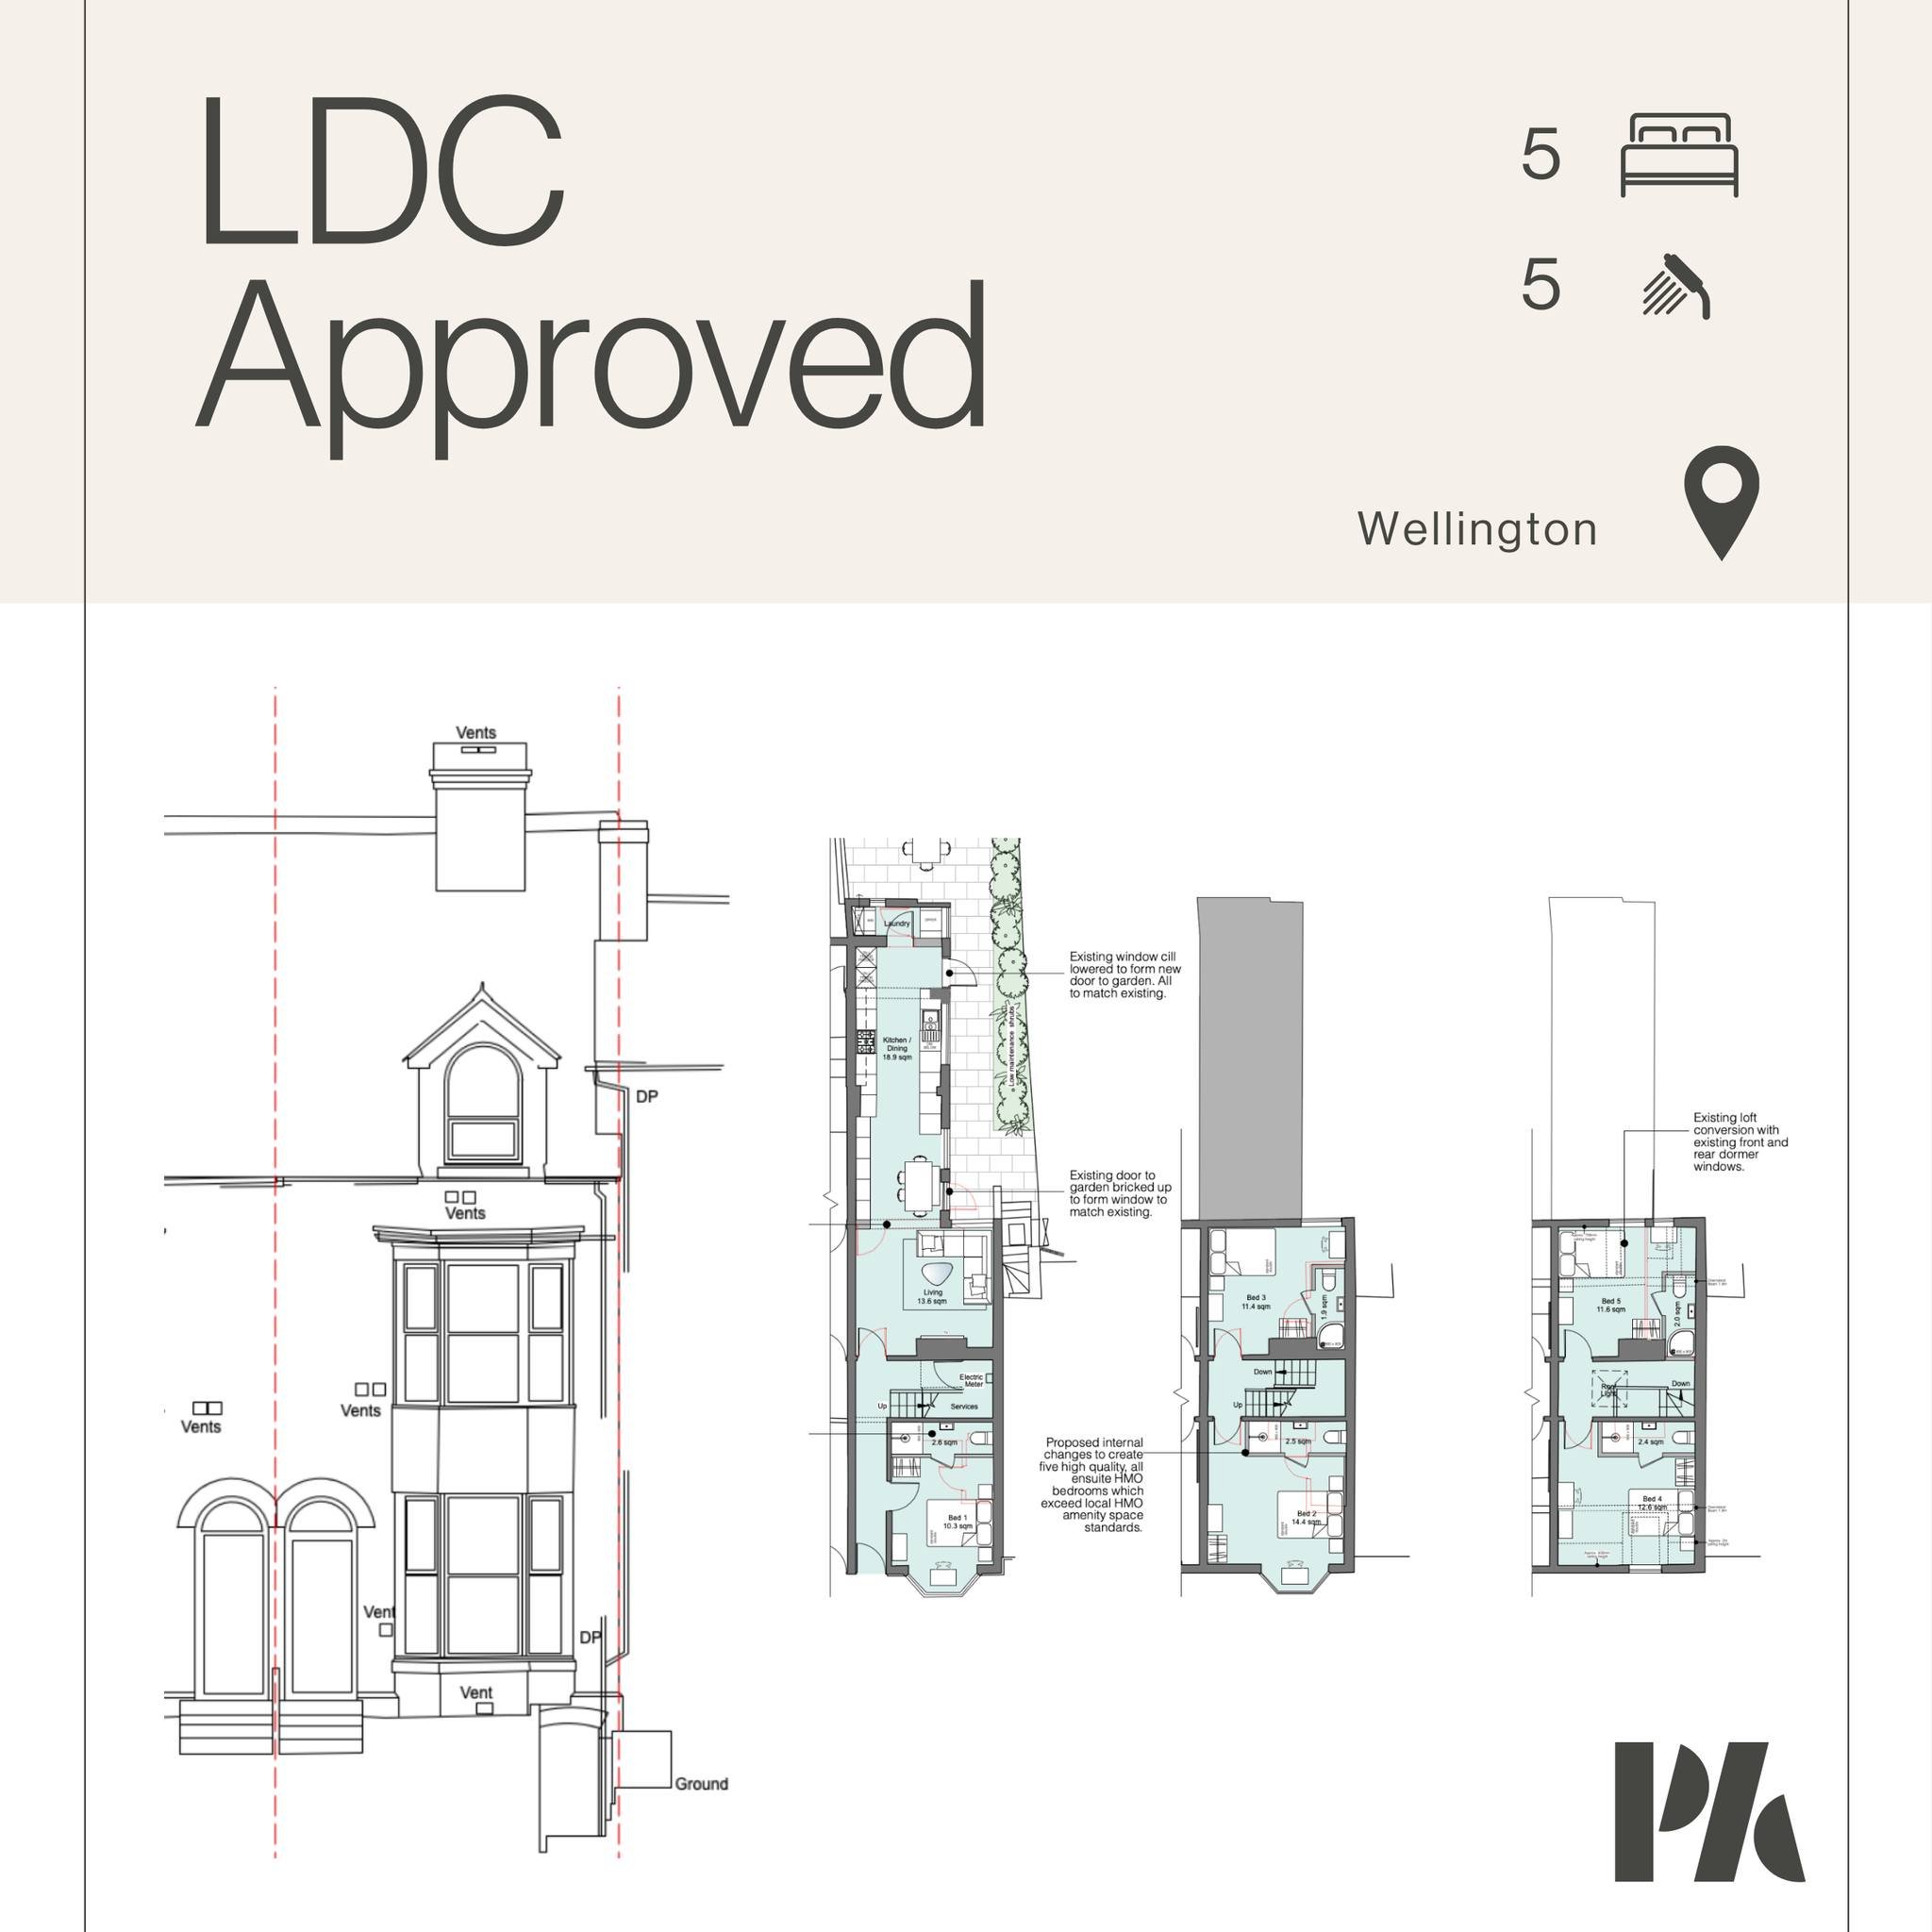 C3 dwelling to C4 HMO PD change of use with minor rear alterations - proposed lawful development certificate application approved 💥 This one actually came through in March but I hadn't shared it on the gram yet. 

Really looking forward to seeing wh